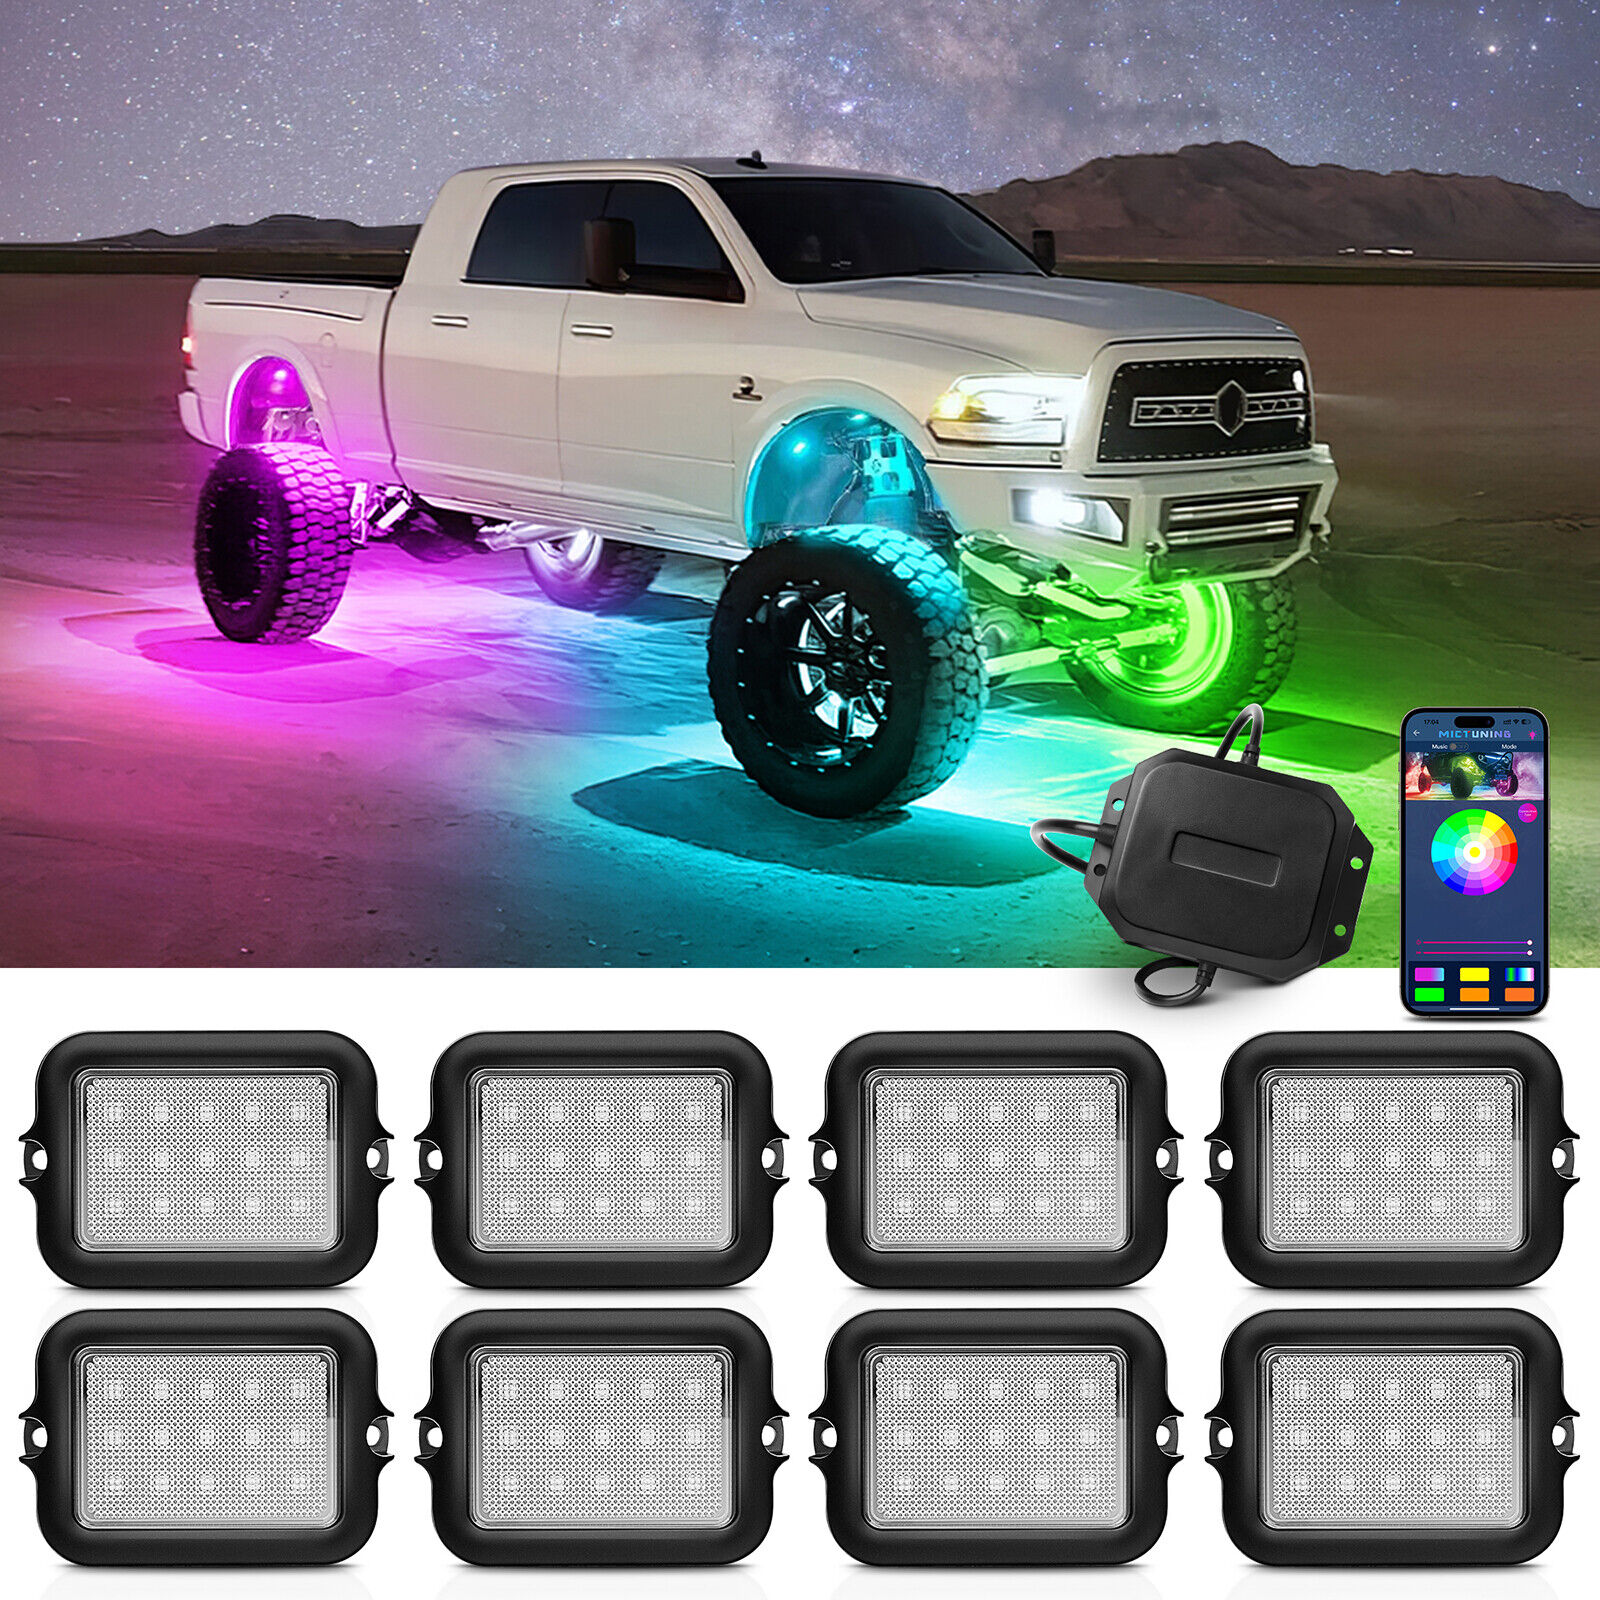 MICTUNING Y1 8 Pods RGB+IC LED Rock Lights Offroad Underbody Music Wireless APP